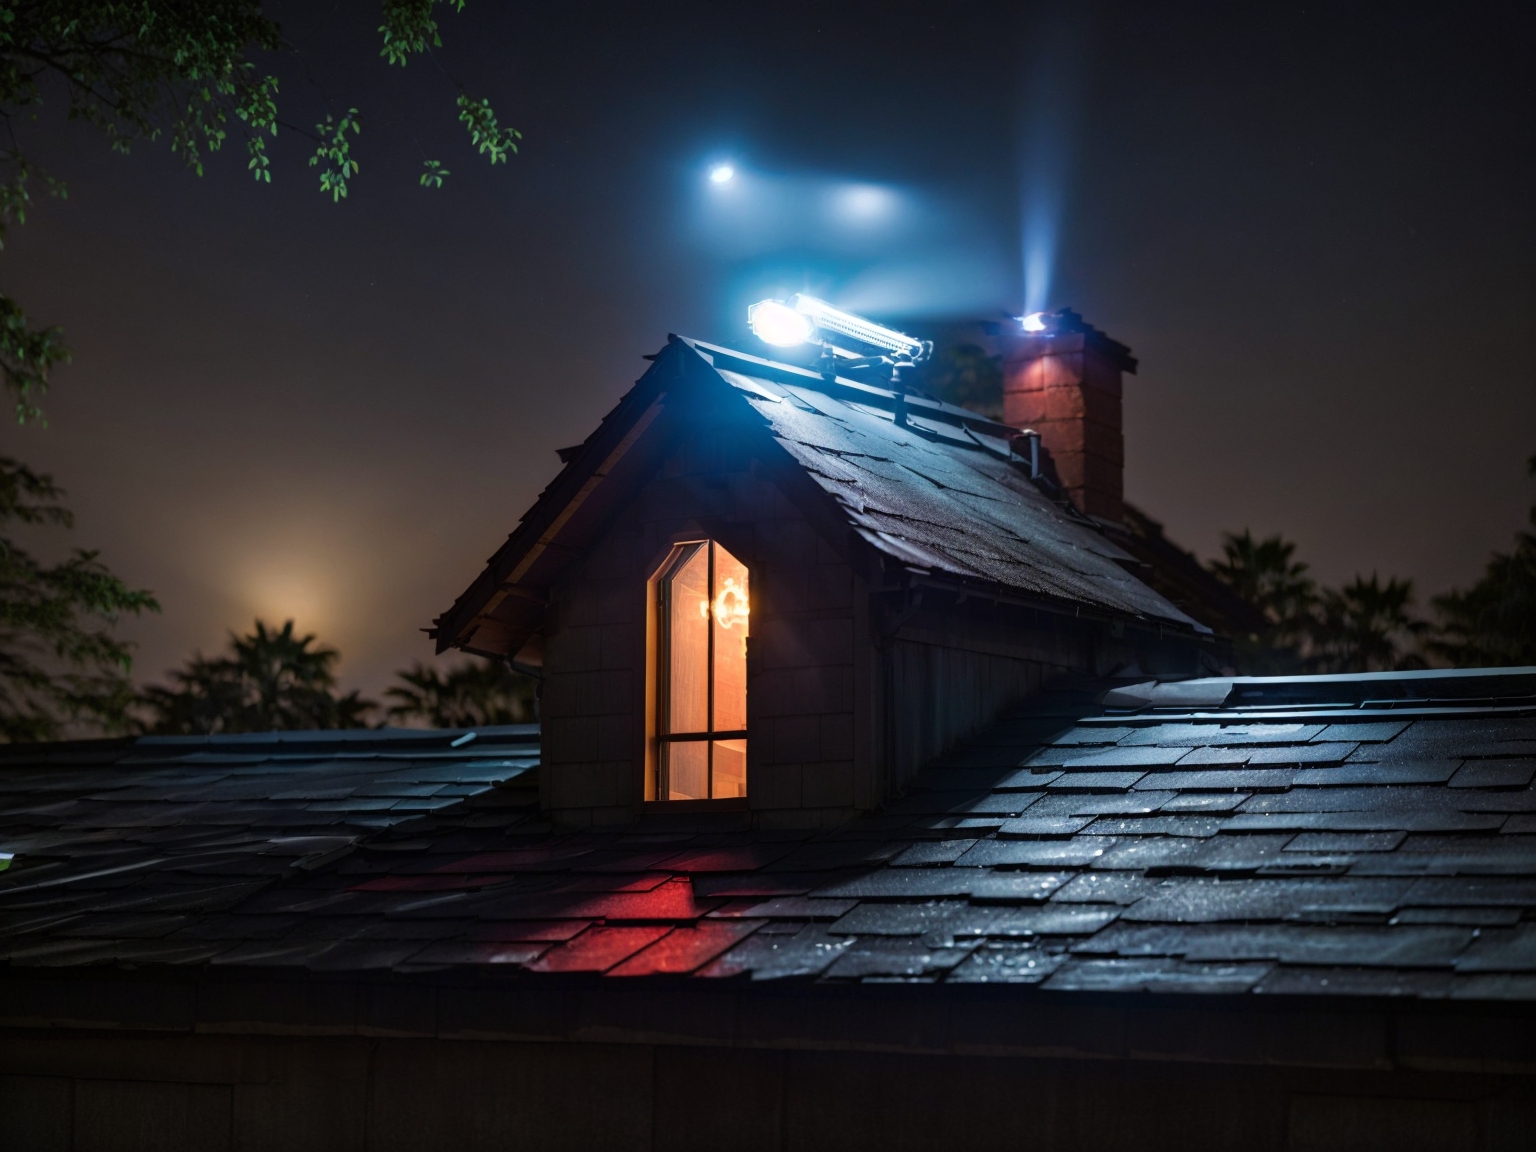 keep crows away from roofs with bright lights